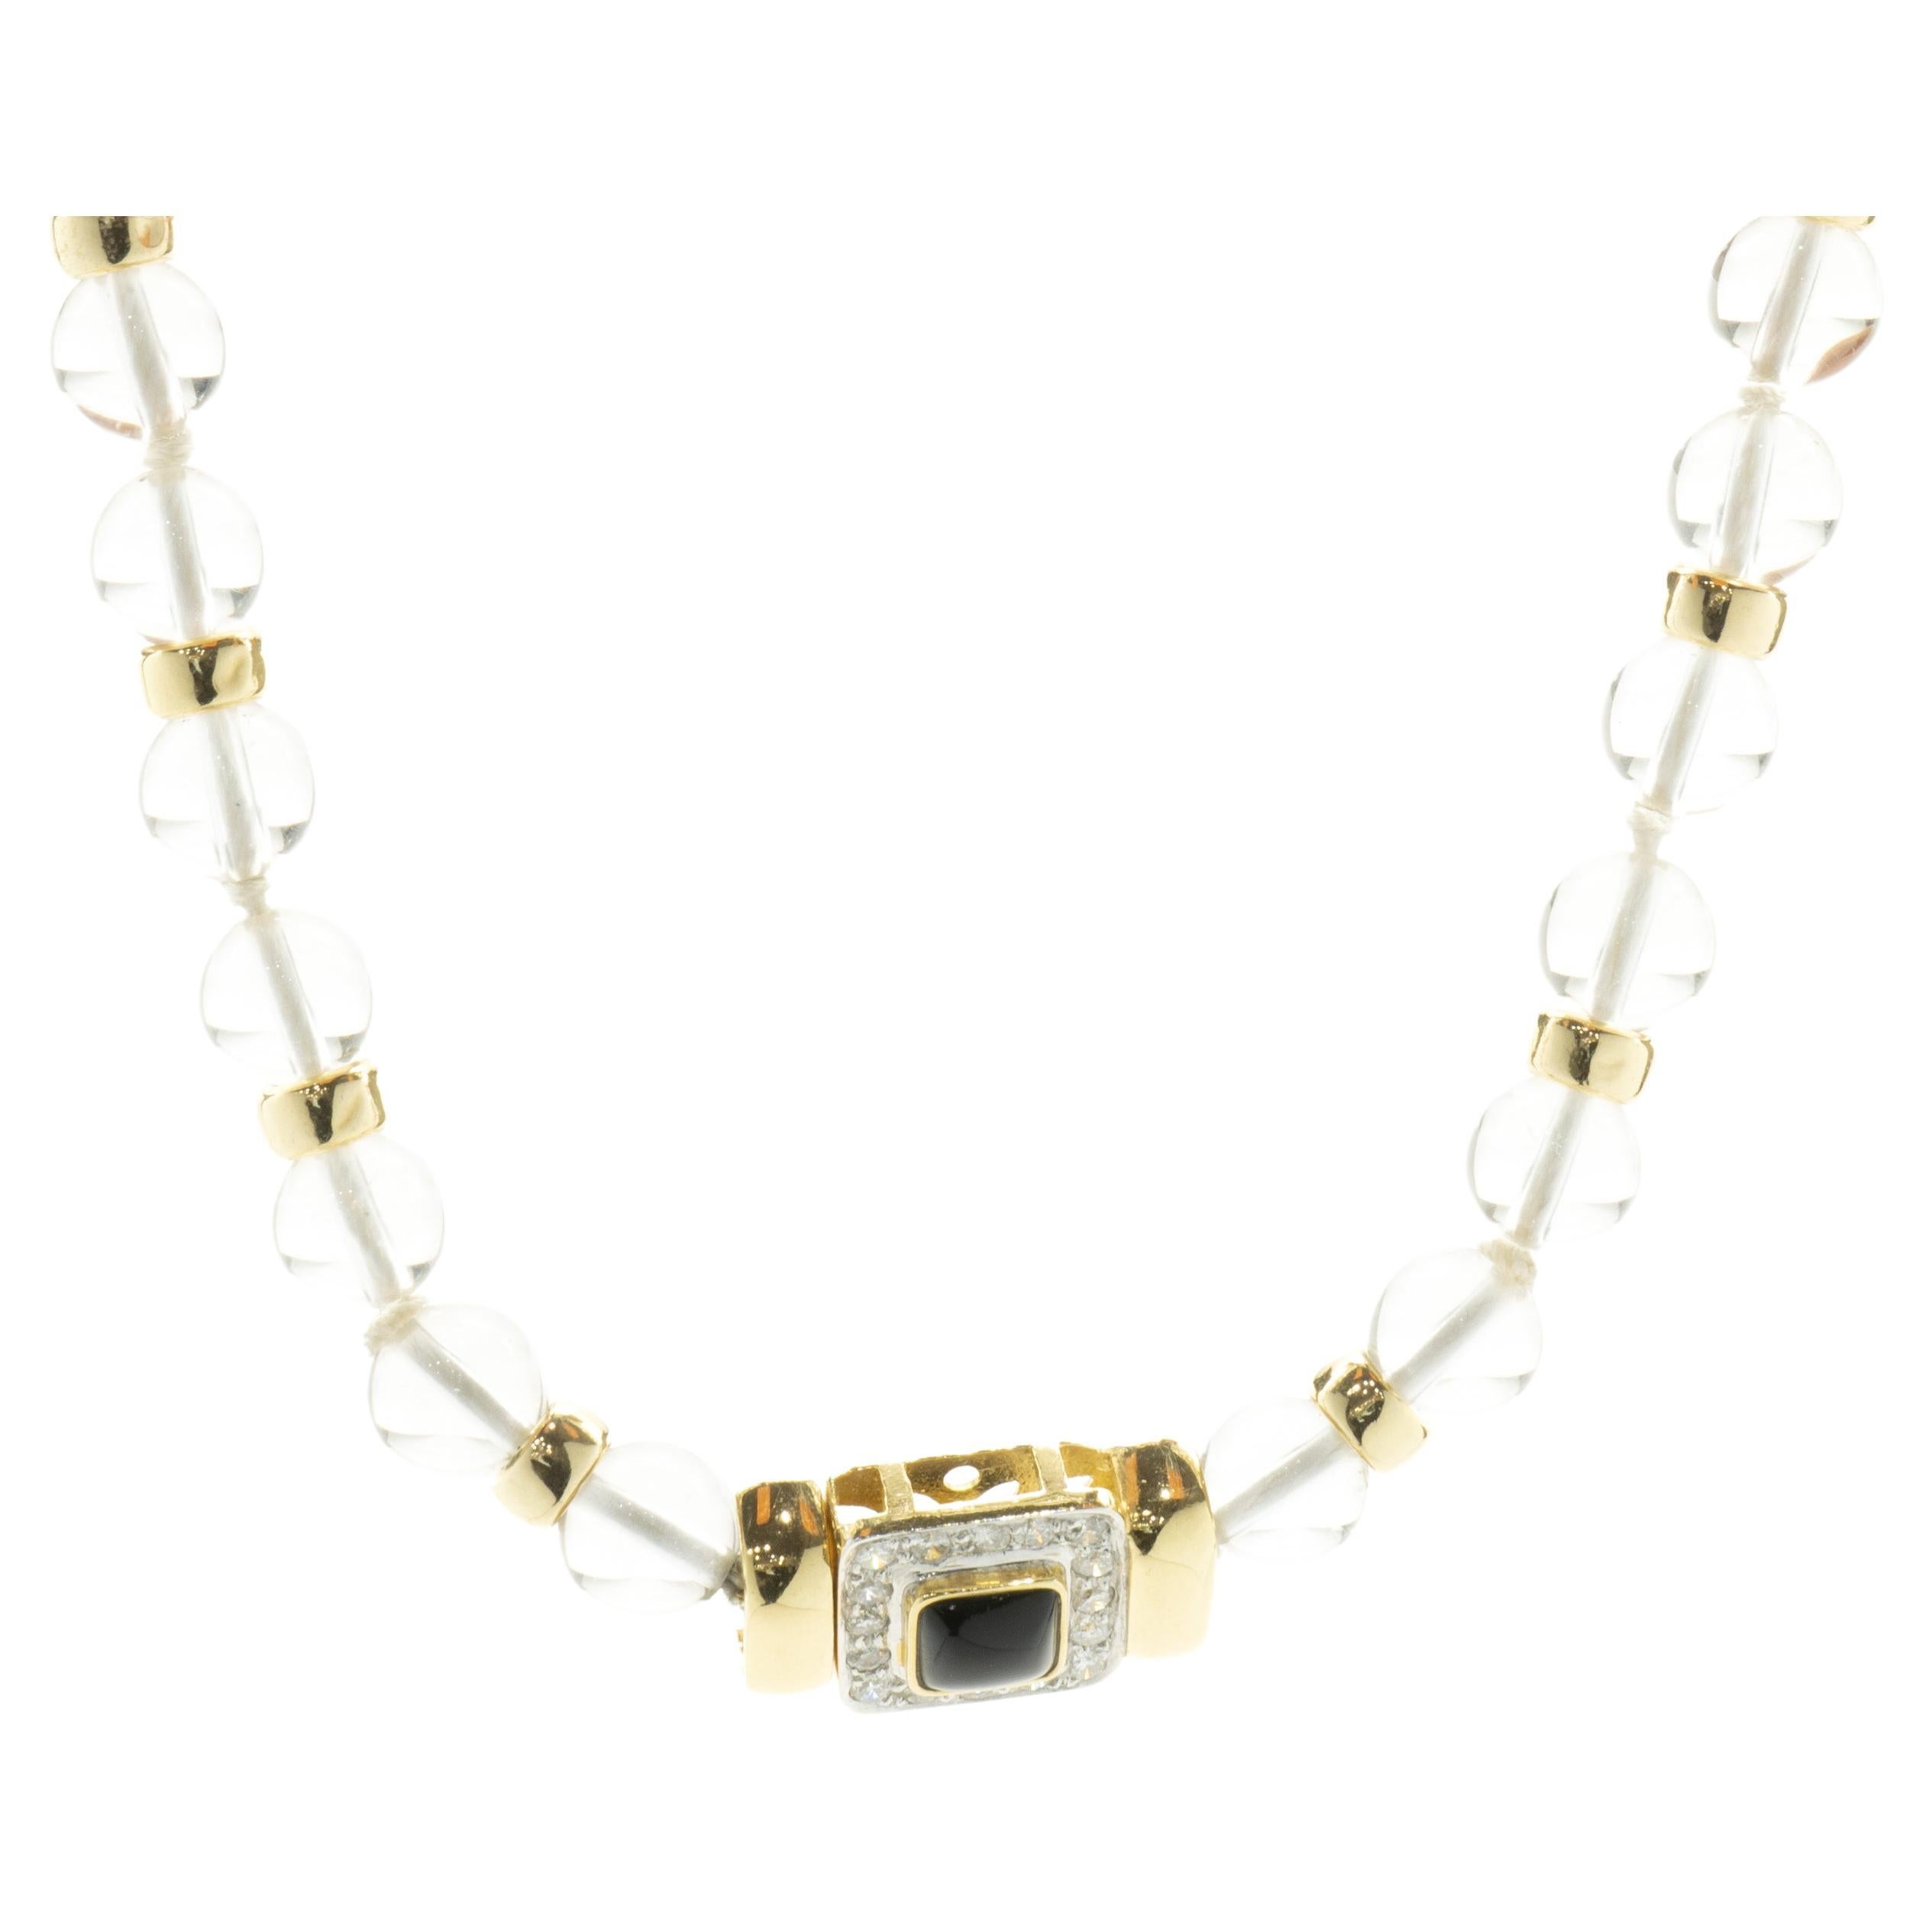 Mings 14 Karat Yellow Gold Diamond and Onyx Necklace For Sale